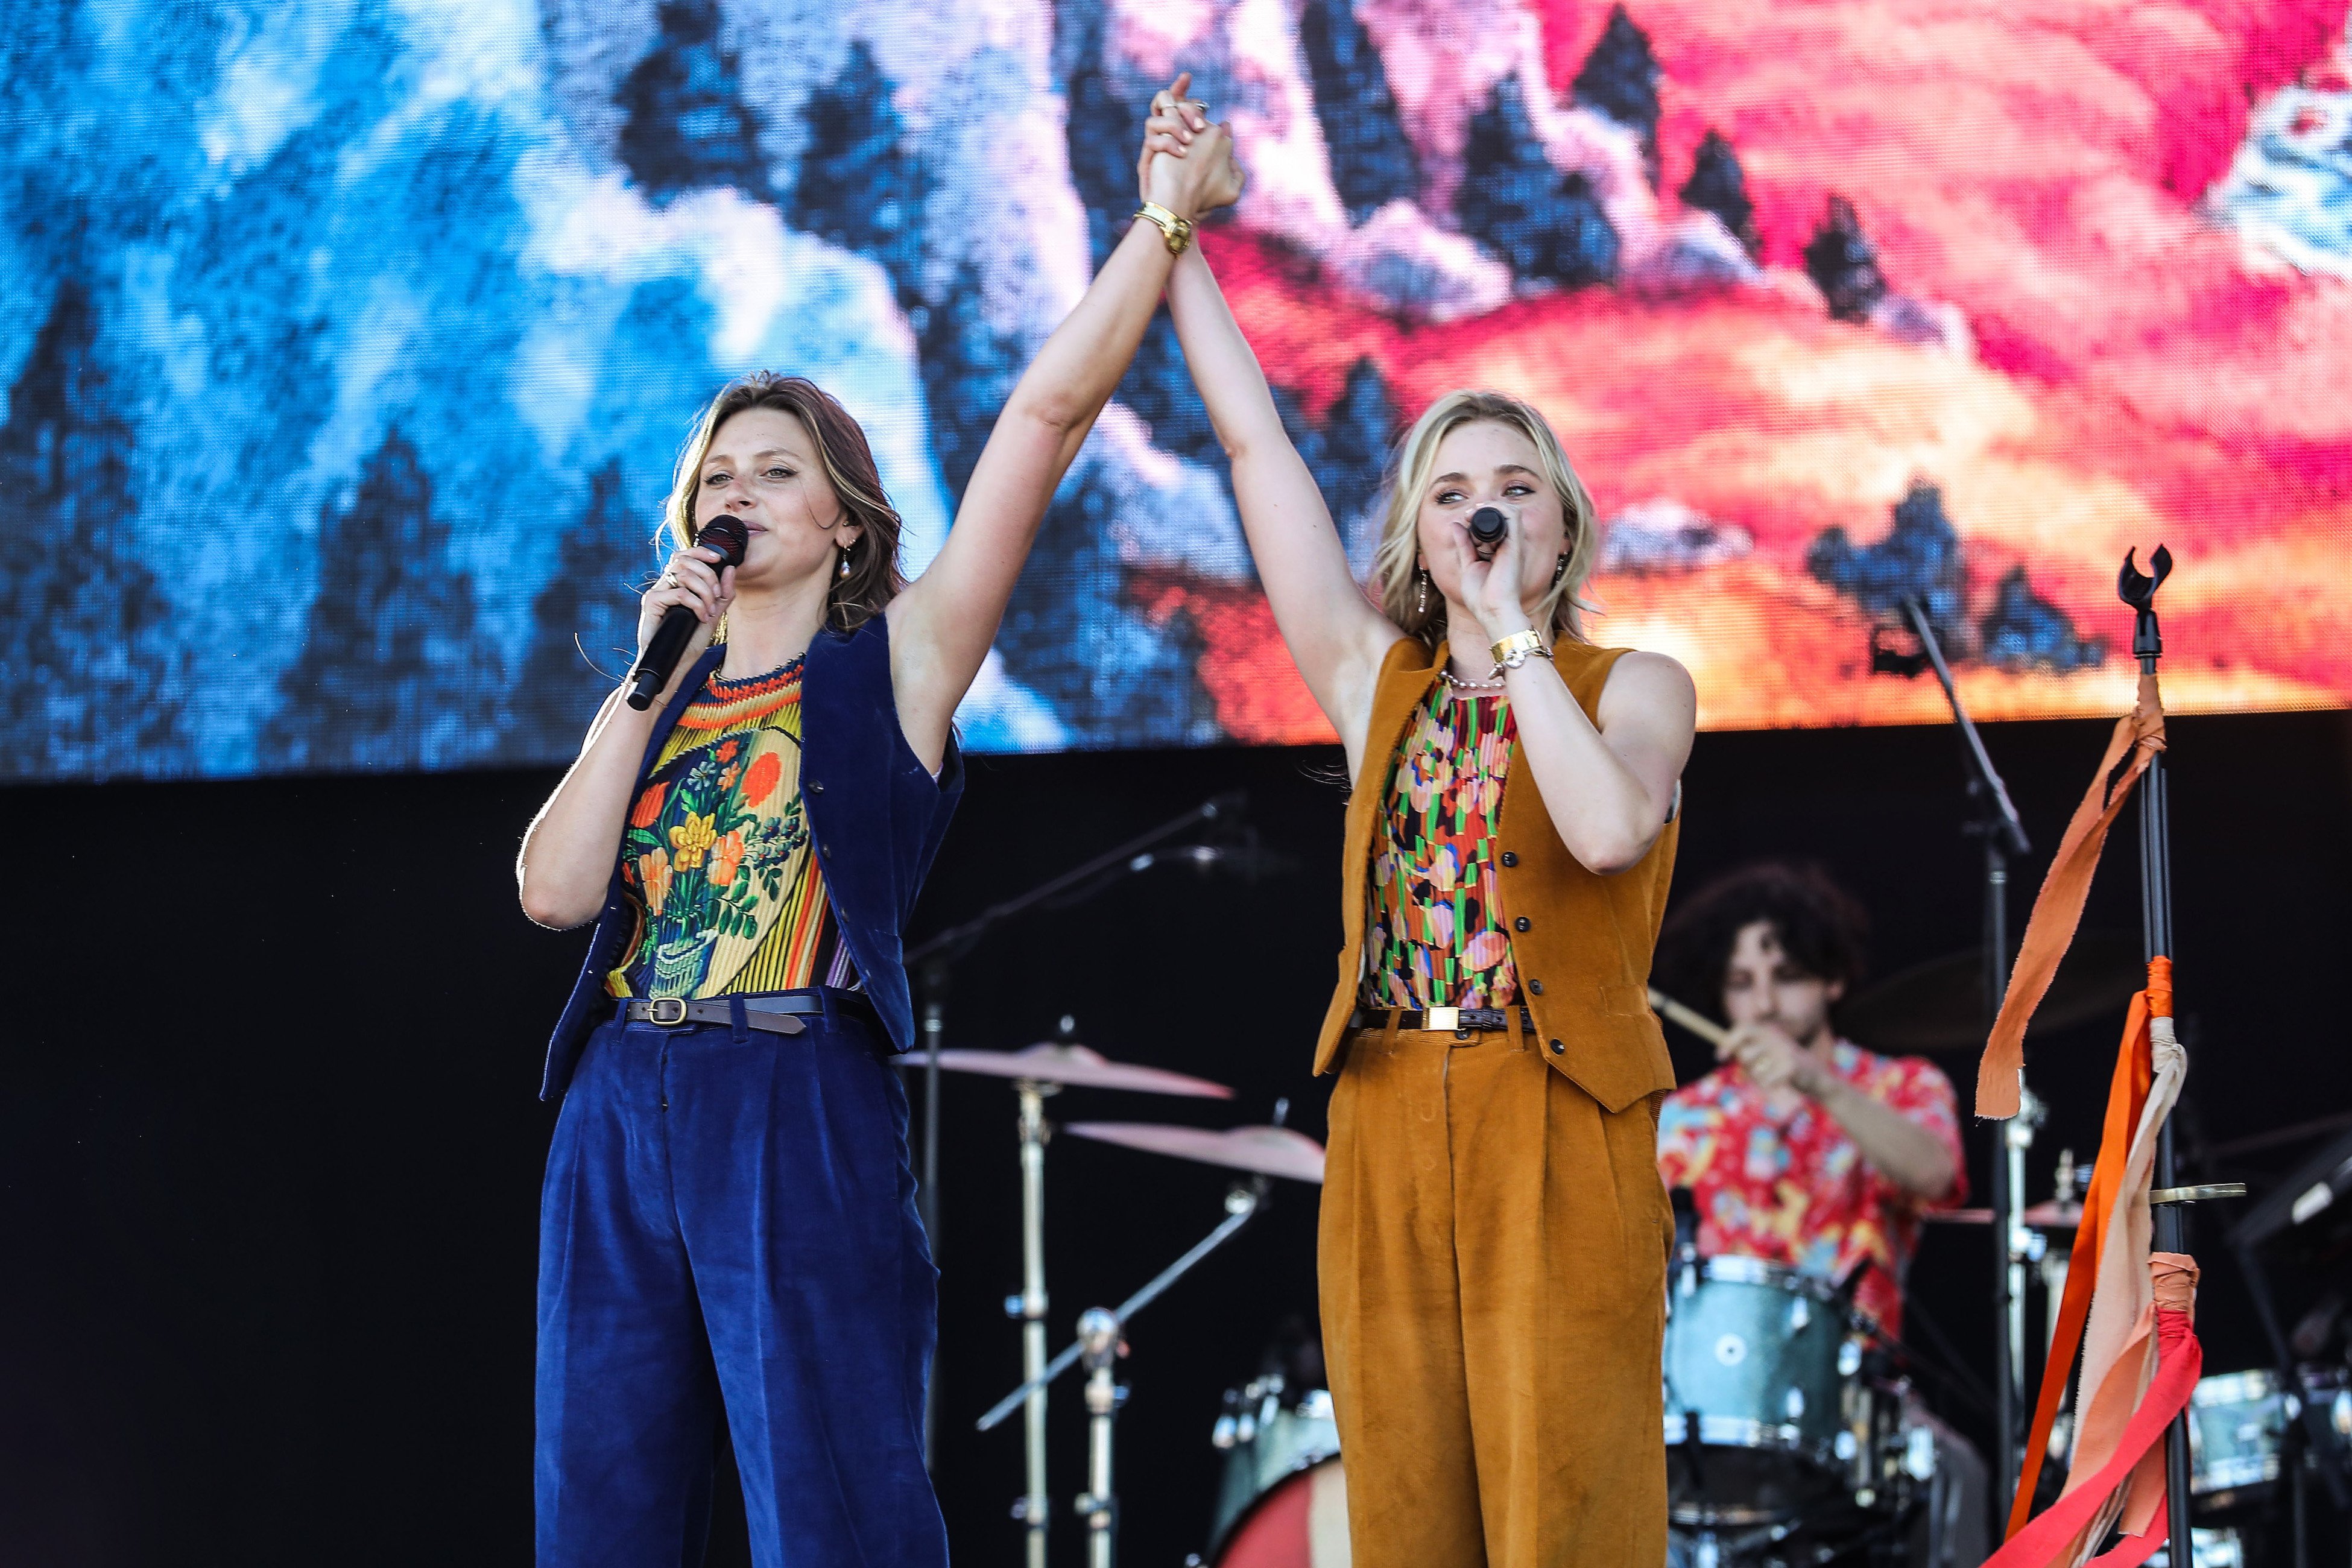 Aly Michalka and AJ Michalka of Aly & AJ perform on stage at Governors Ball 2022